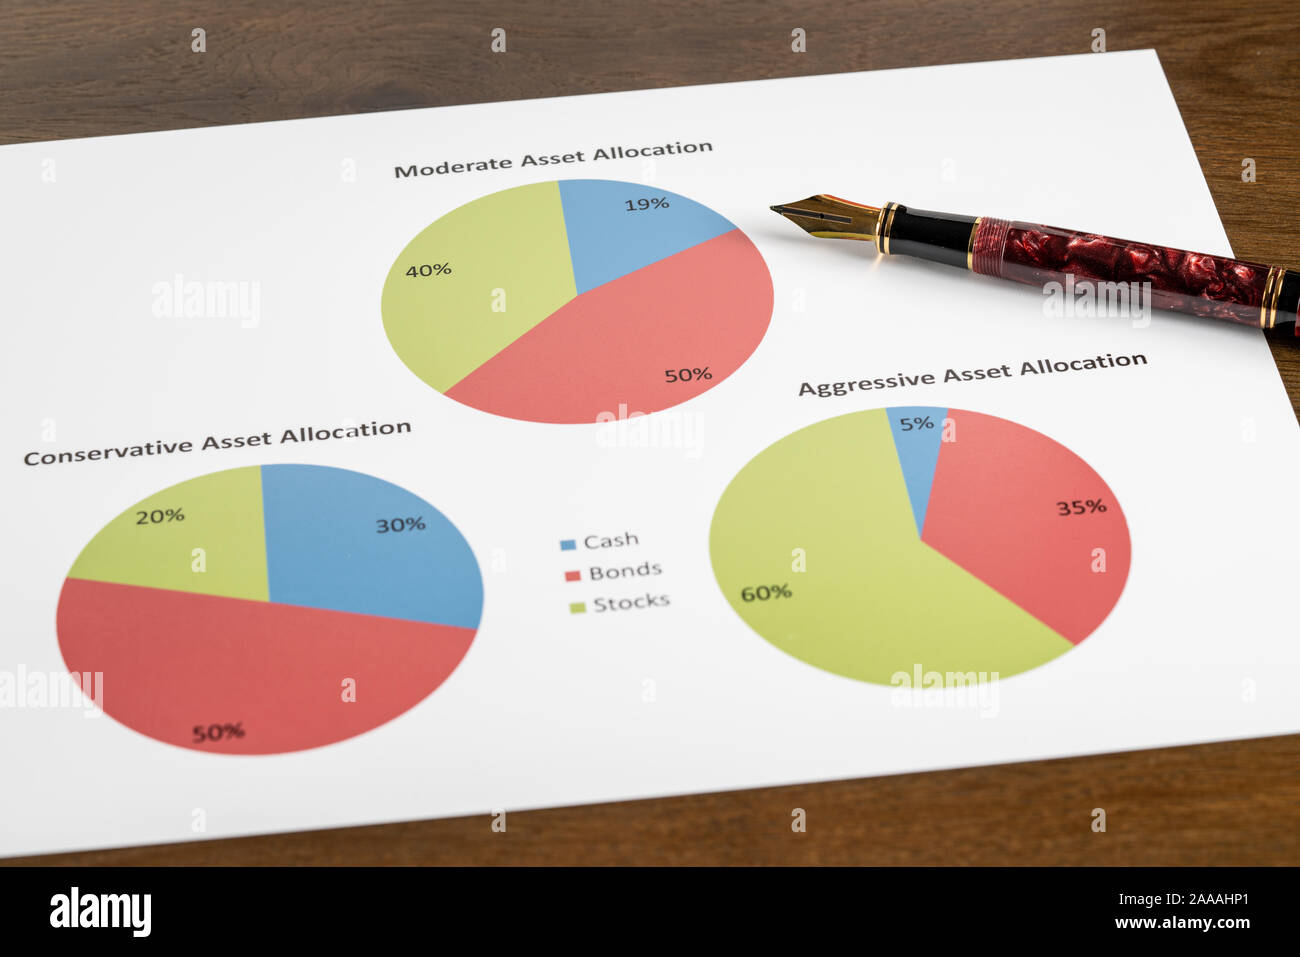 Expensive gold fountain pen pointing to moderate asset allocation pie chart among other choices for investments Stock Photo